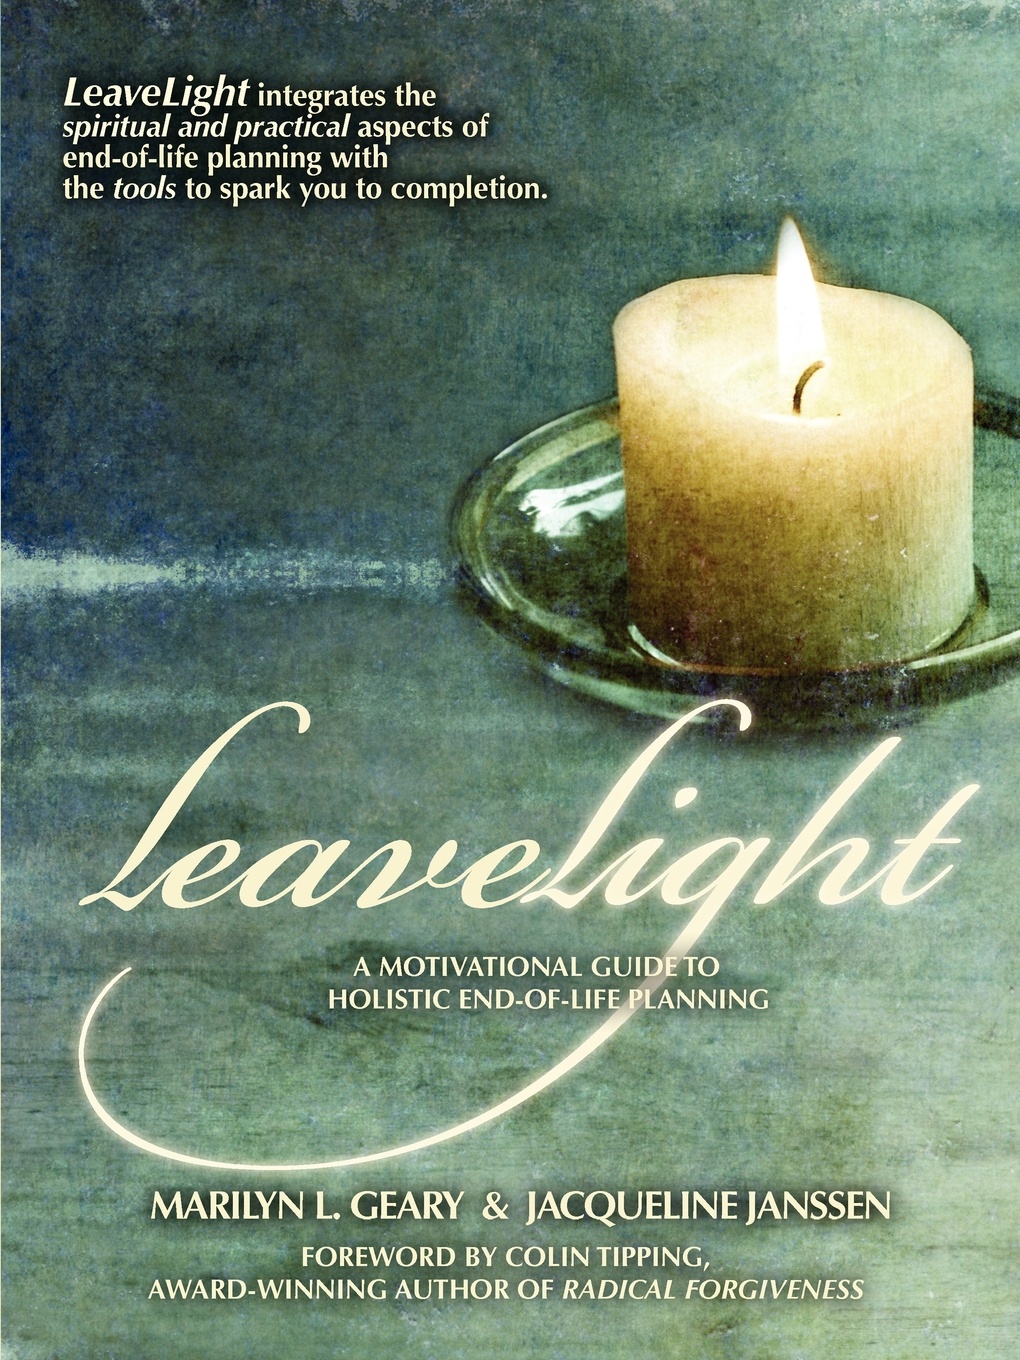 LeaveLight. A Motivational Guide to Holistic End-of-Life Planning, Foreword by Colin Tipping